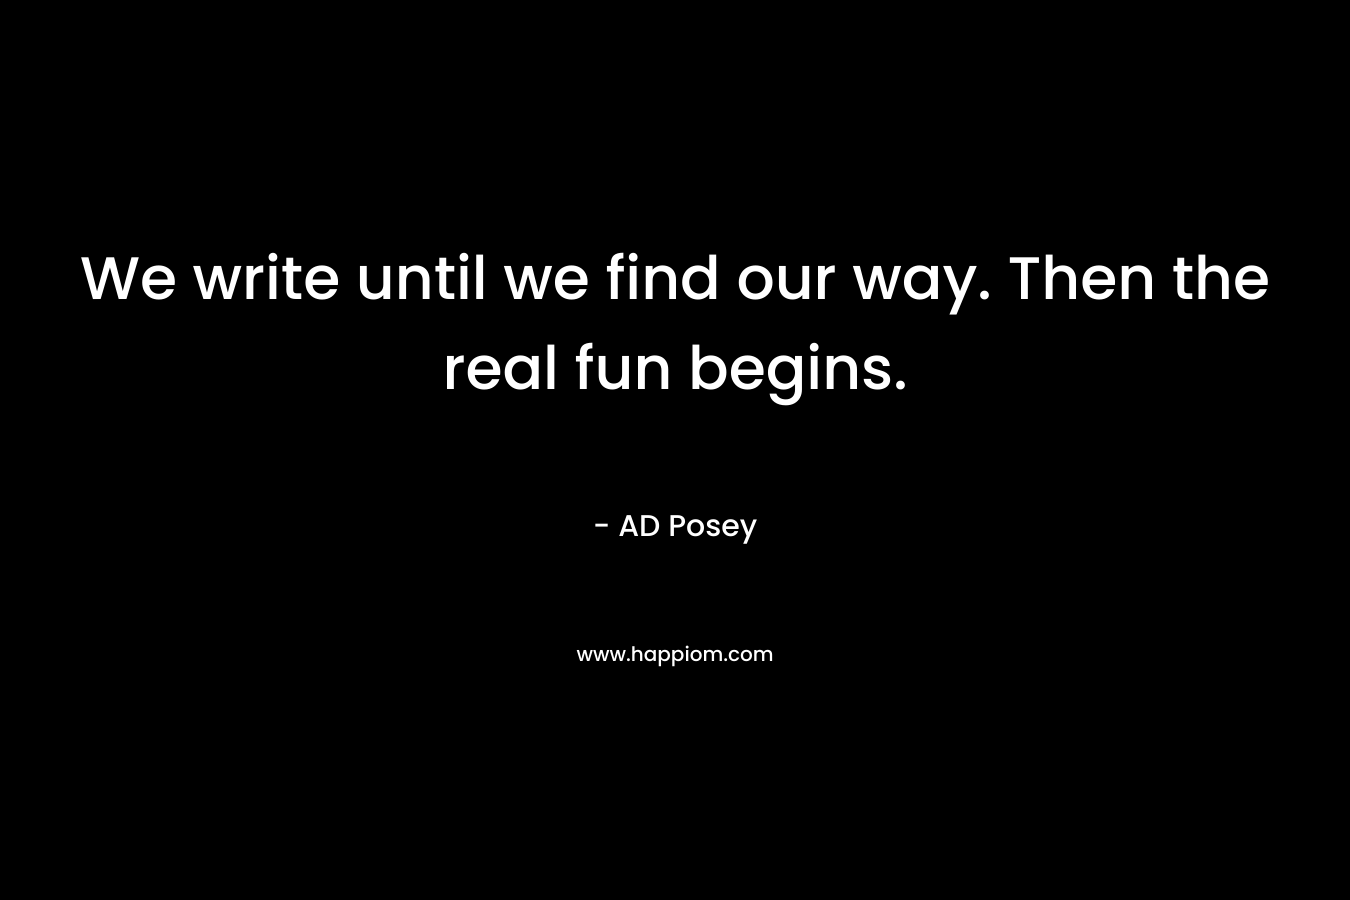 We write until we find our way. Then the real fun begins. – AD Posey